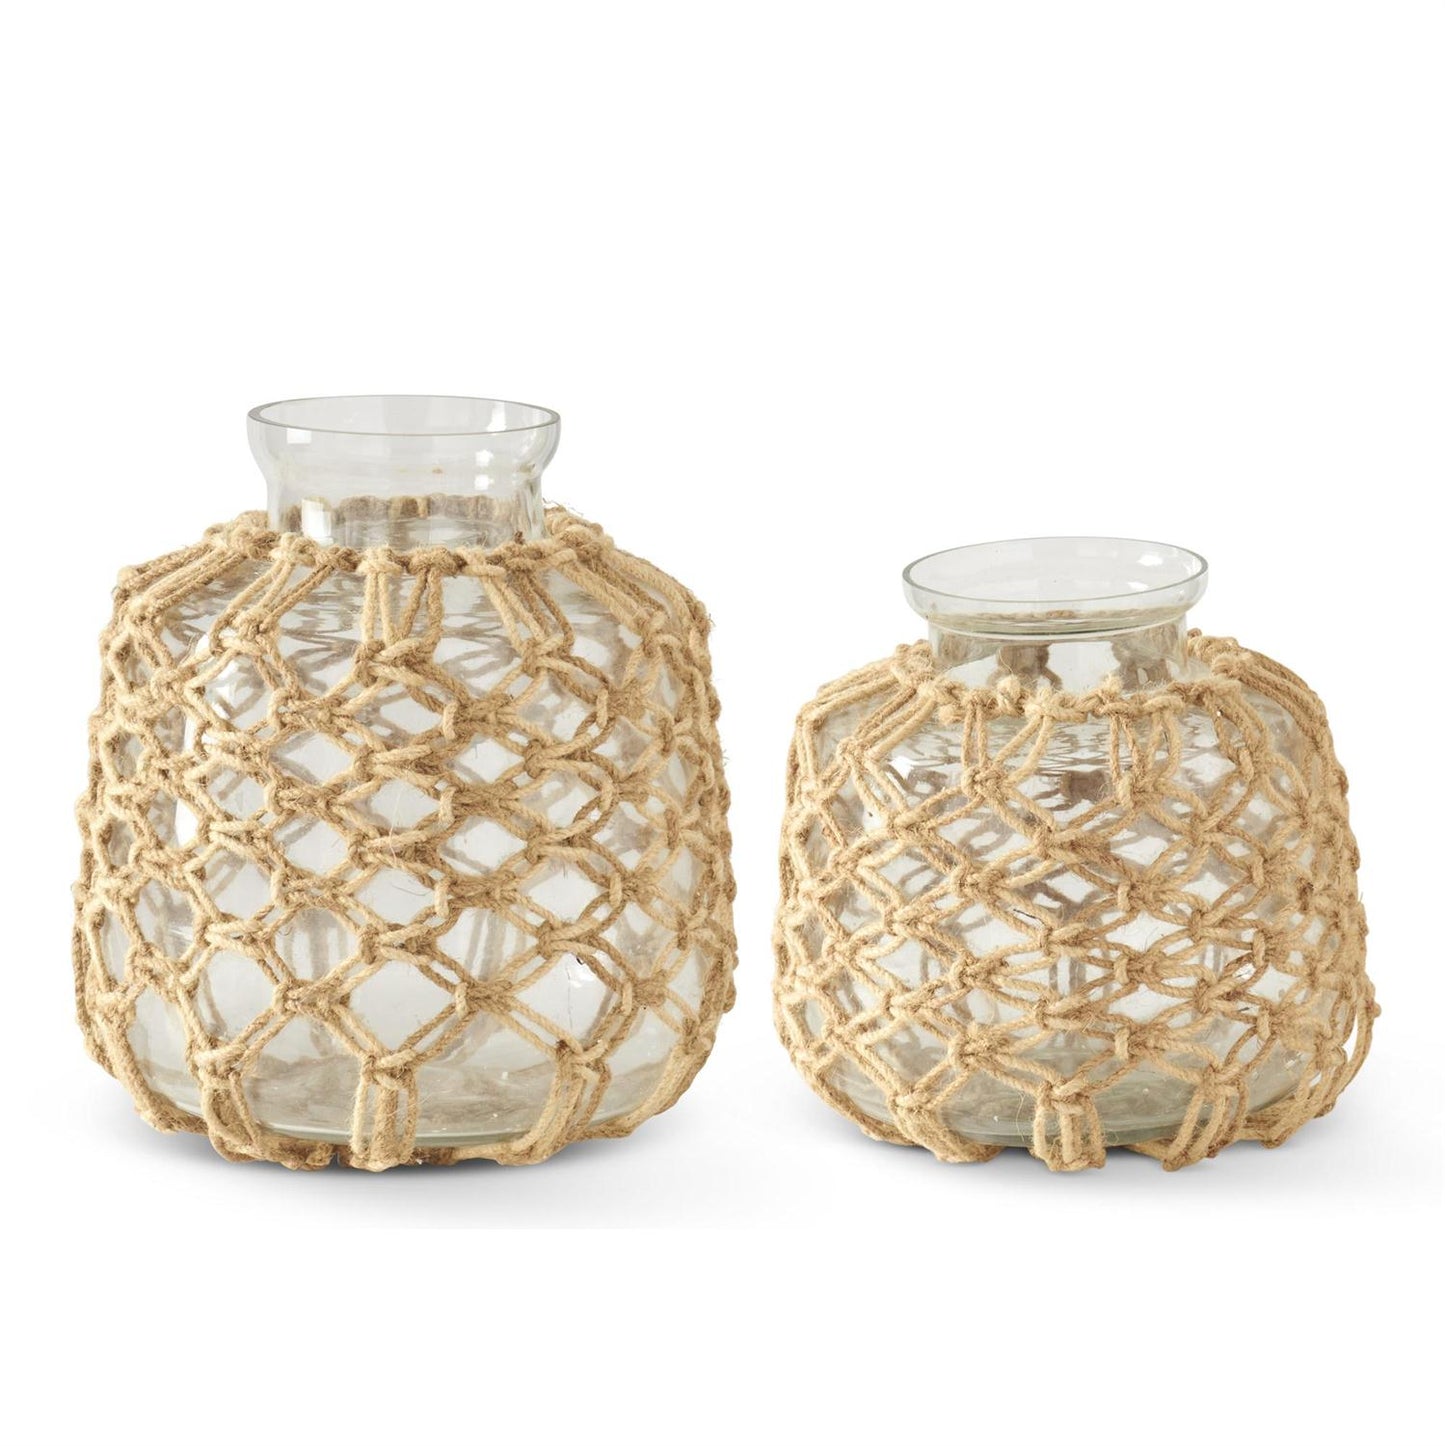 JUTE NET WRAPPED CLEAR GLASS VASES